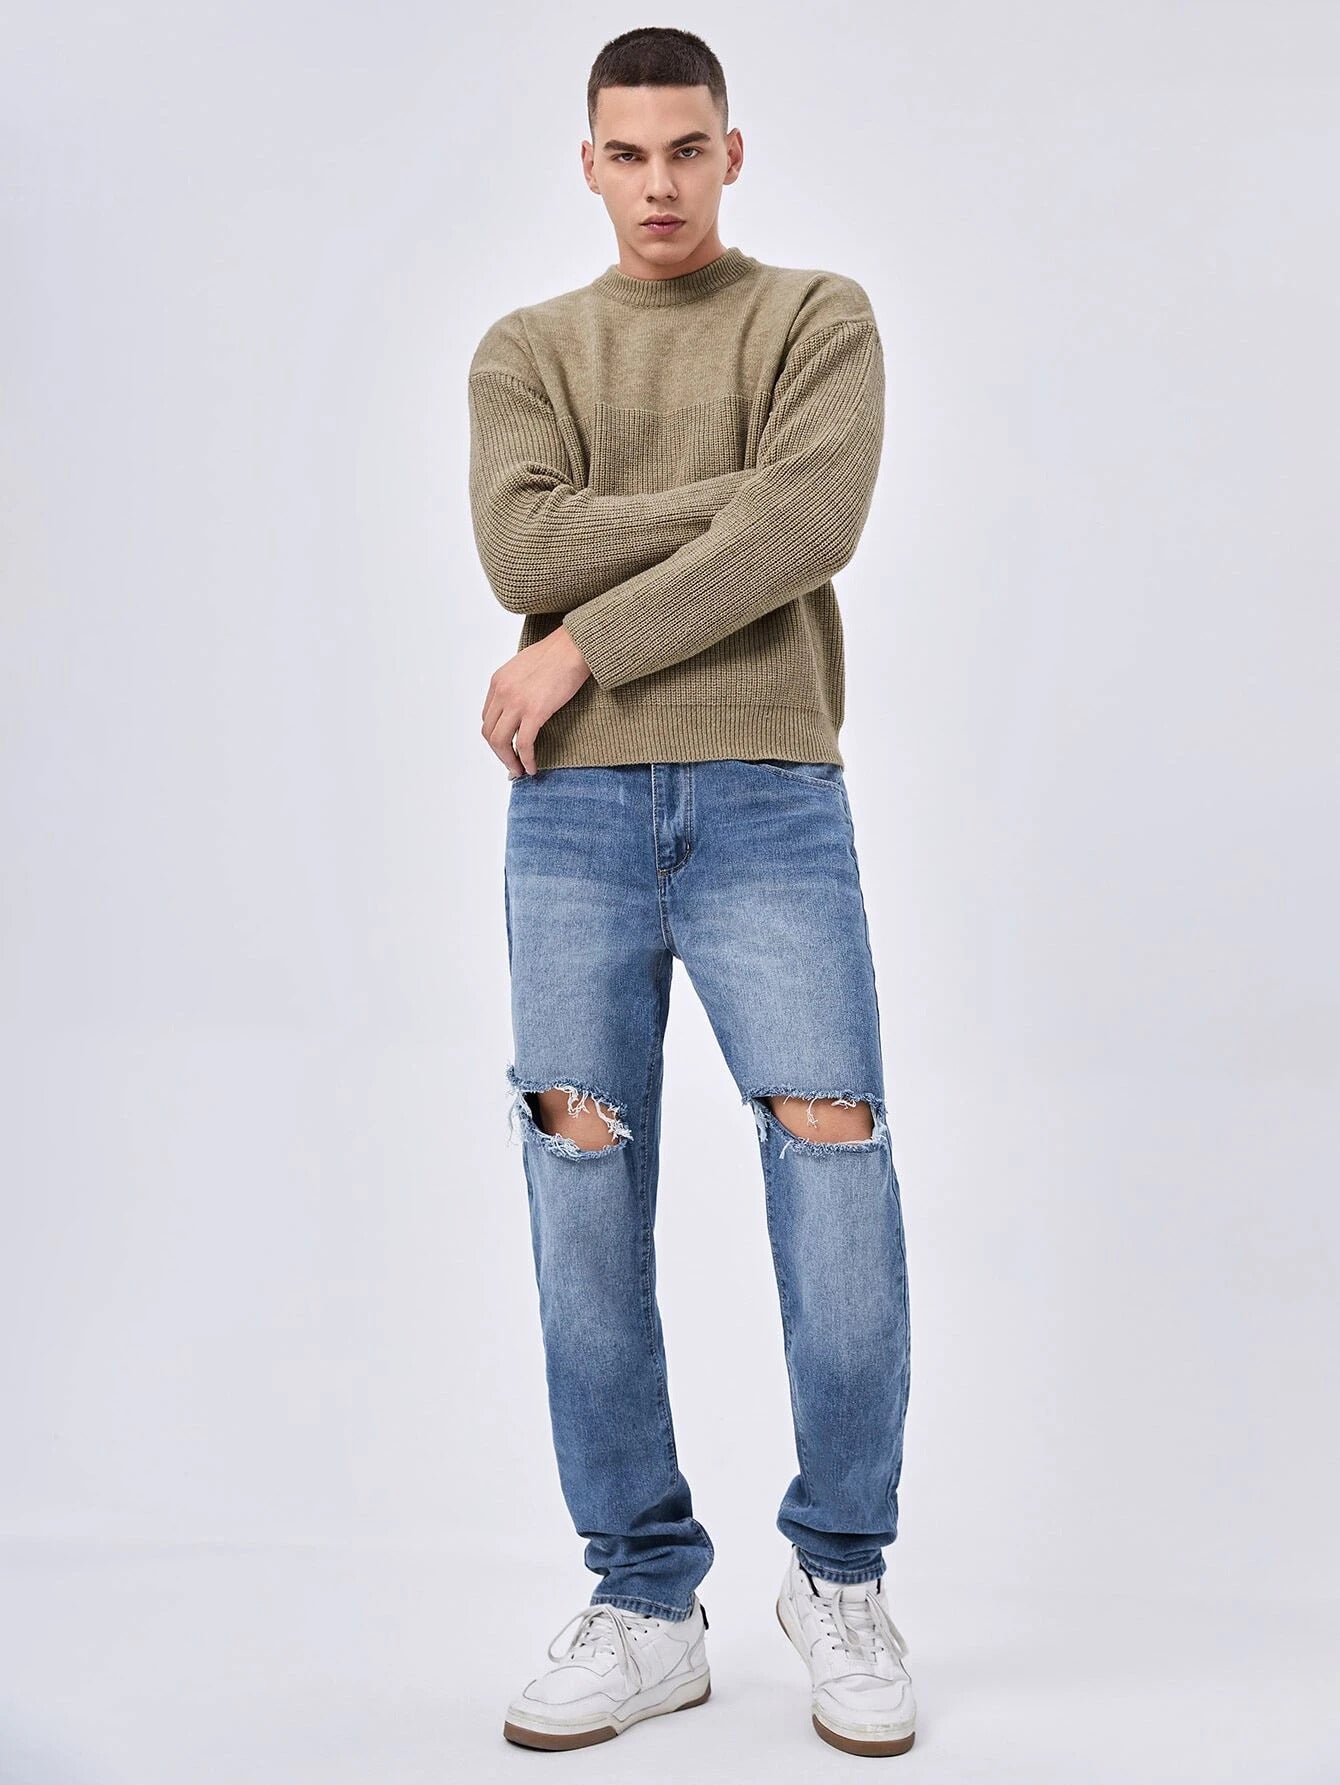 Streetwear Mens Jeans Fashion Casual Knee Hole Elasticity Pencil Pants  Trend Cool High Street Ripped Skinny Jeans Black Jeans - Jeans - AliExpress